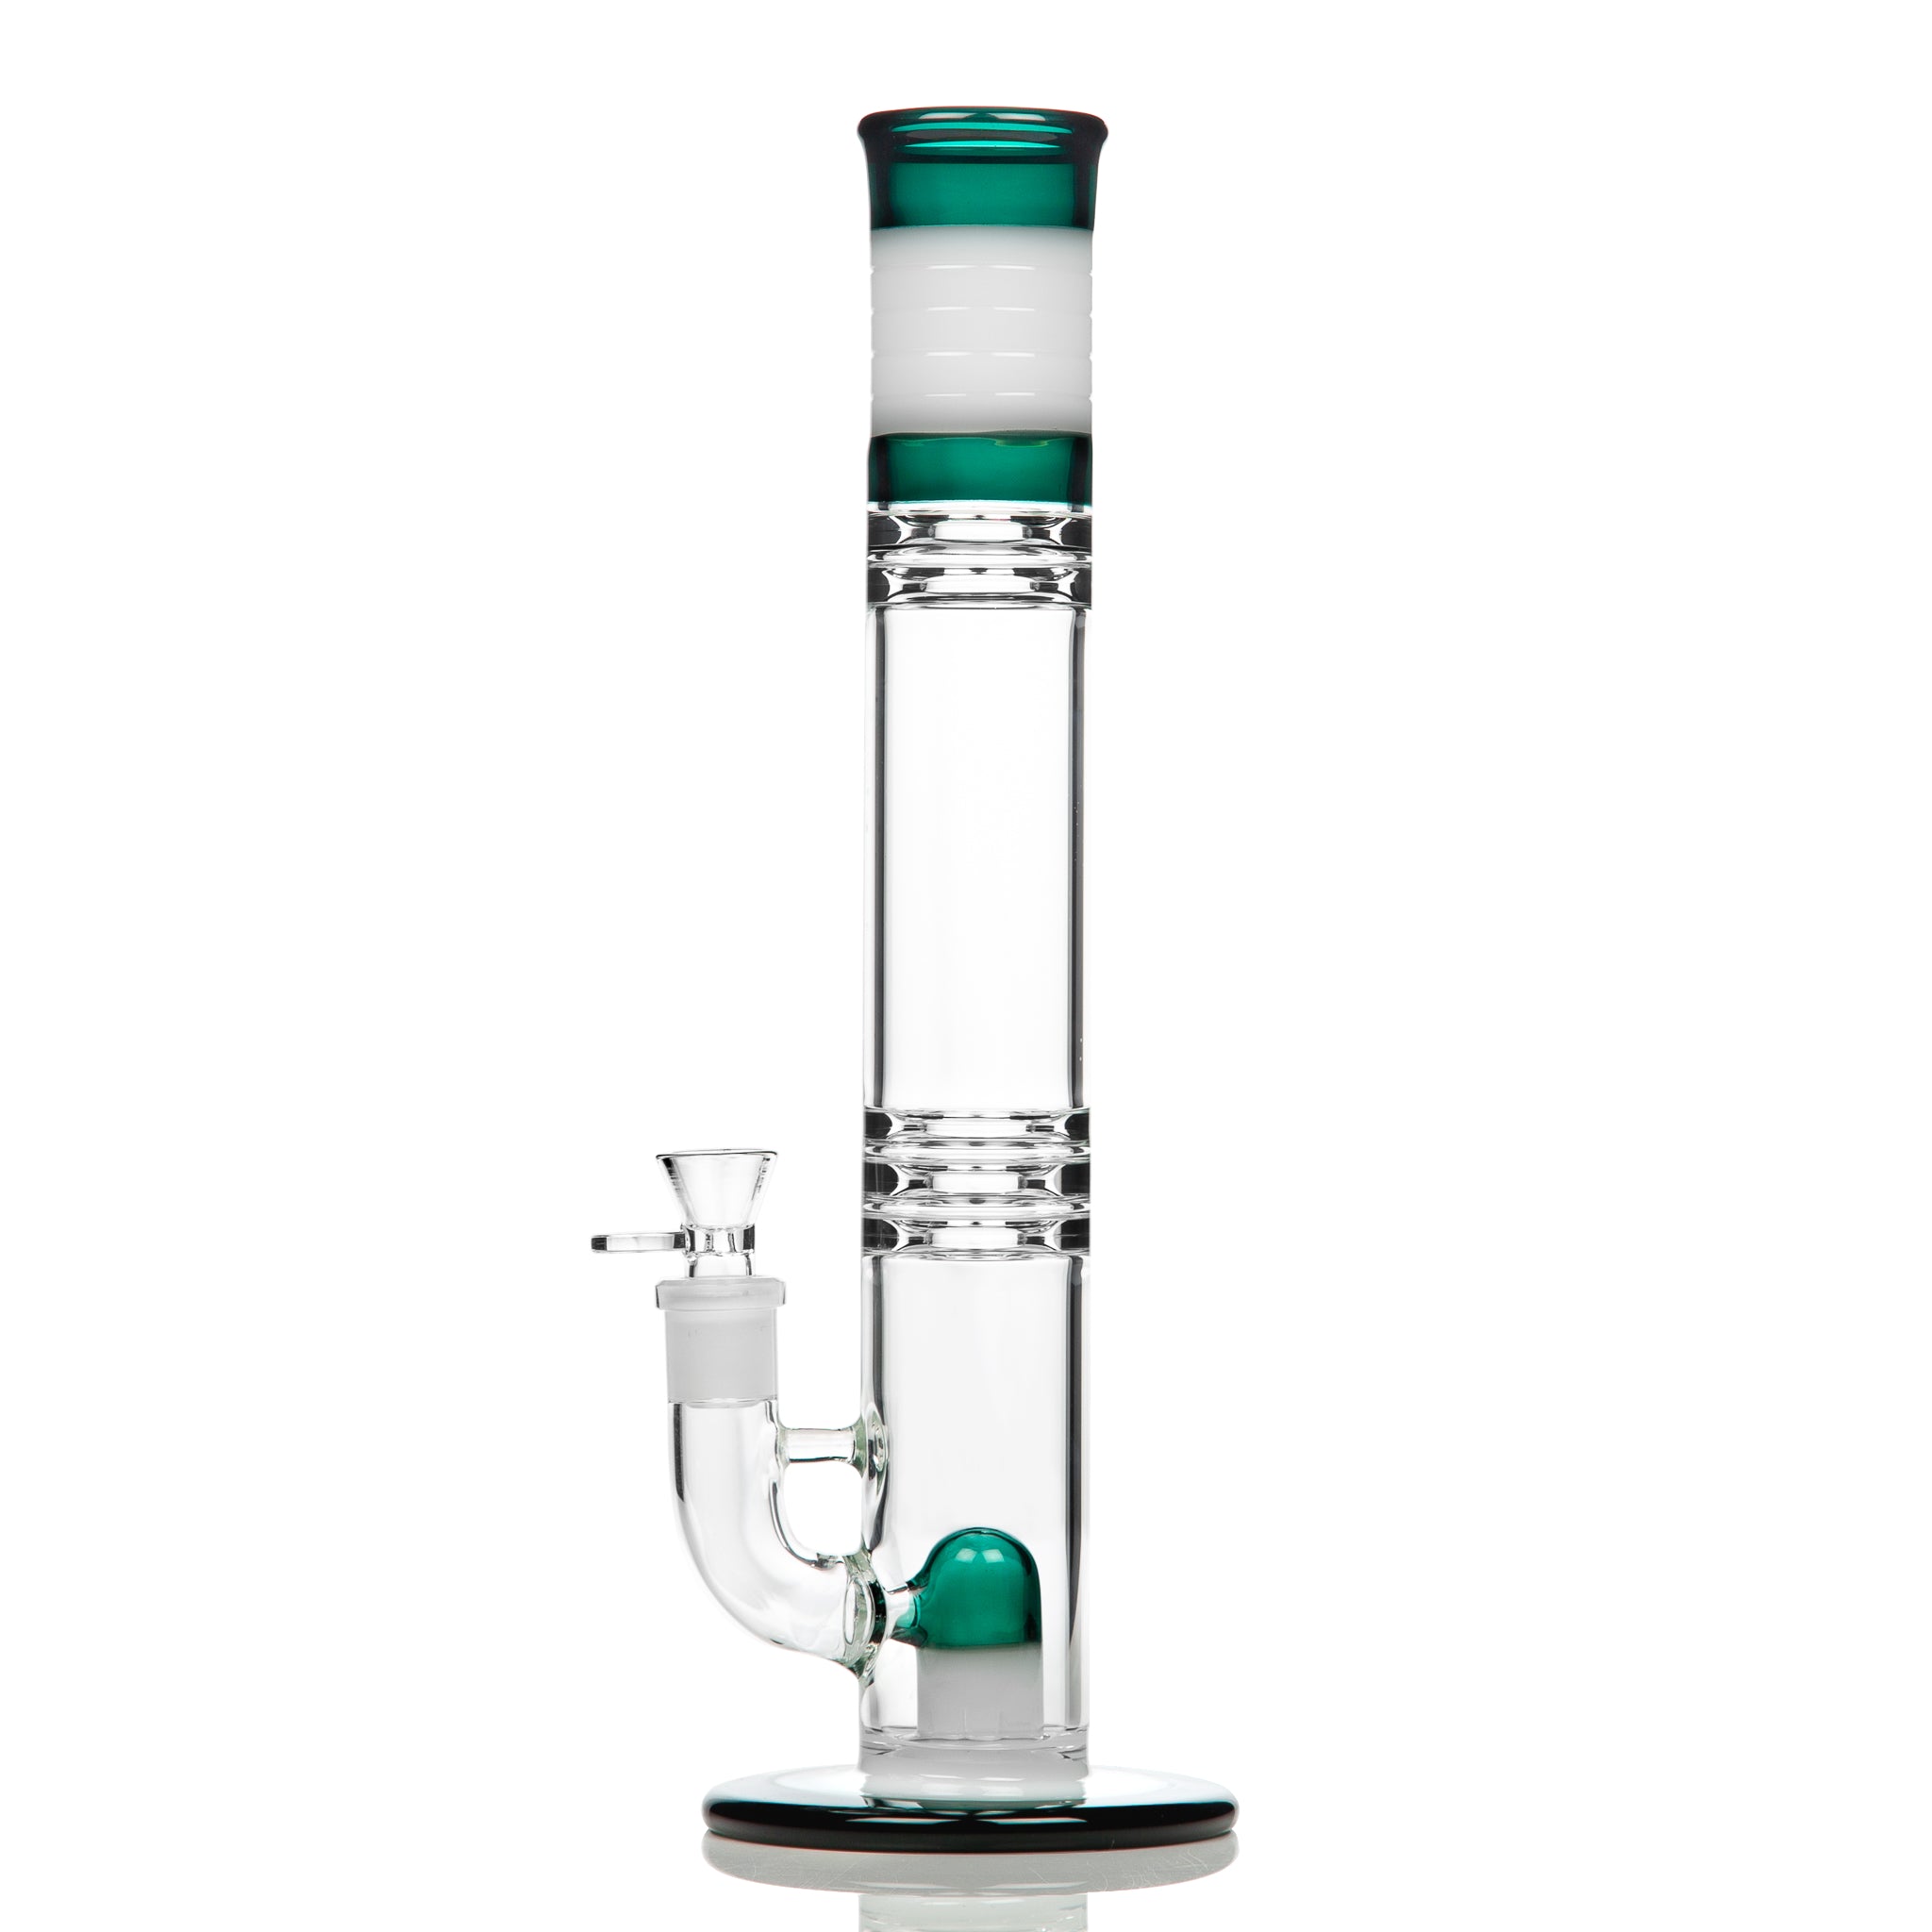 Glass bong from Easy Bong Australia with cone piece.